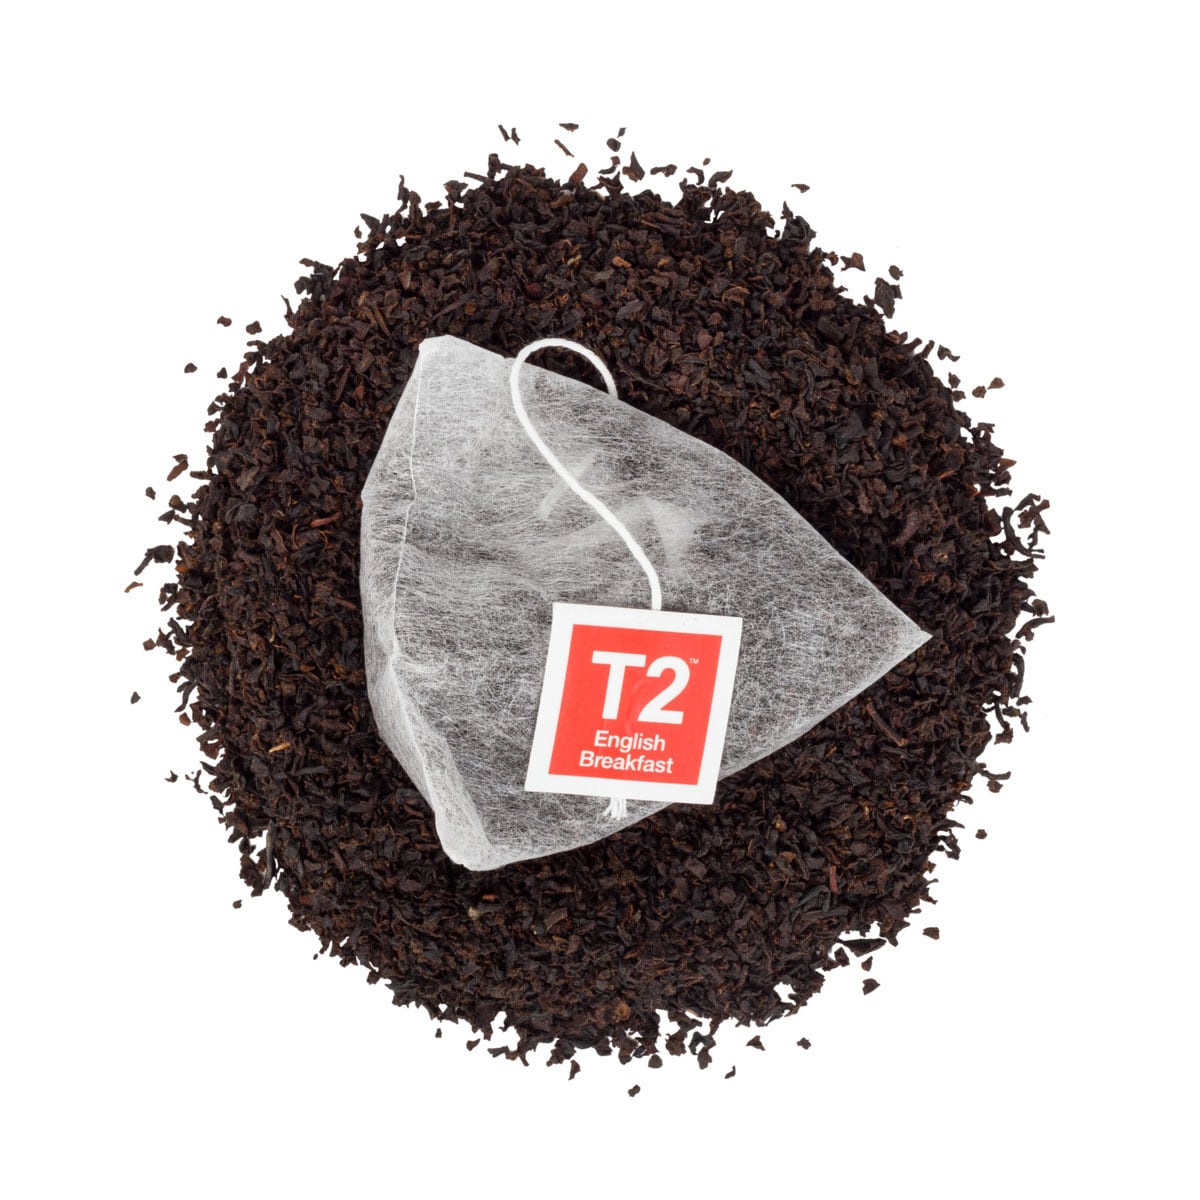 T2 English Breakfast Teabags 60 Pack